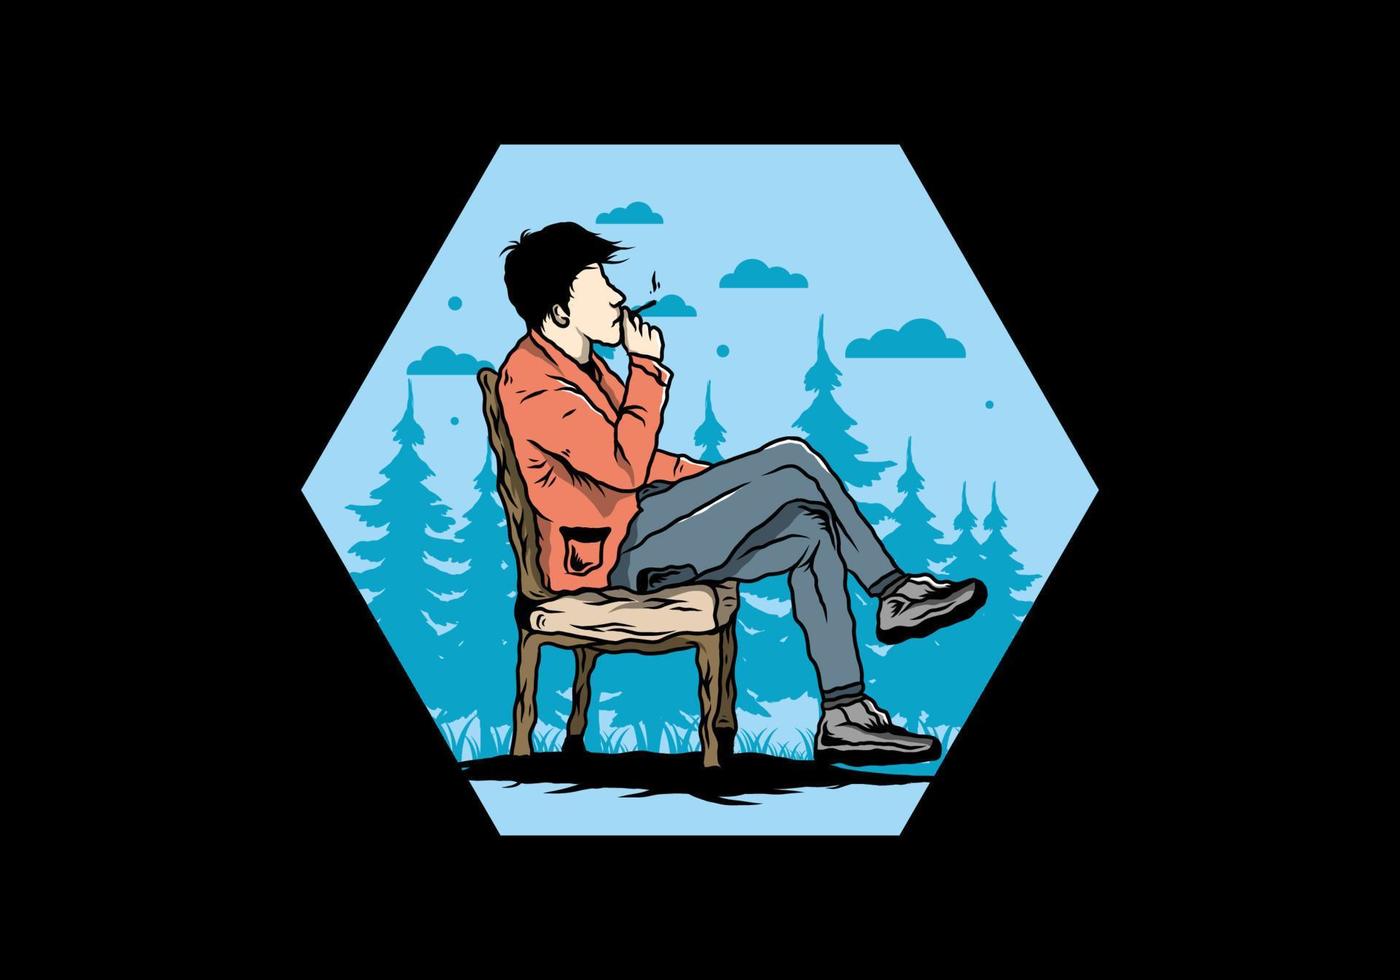 Man sit on chair and smoke cigarettes illustration vector